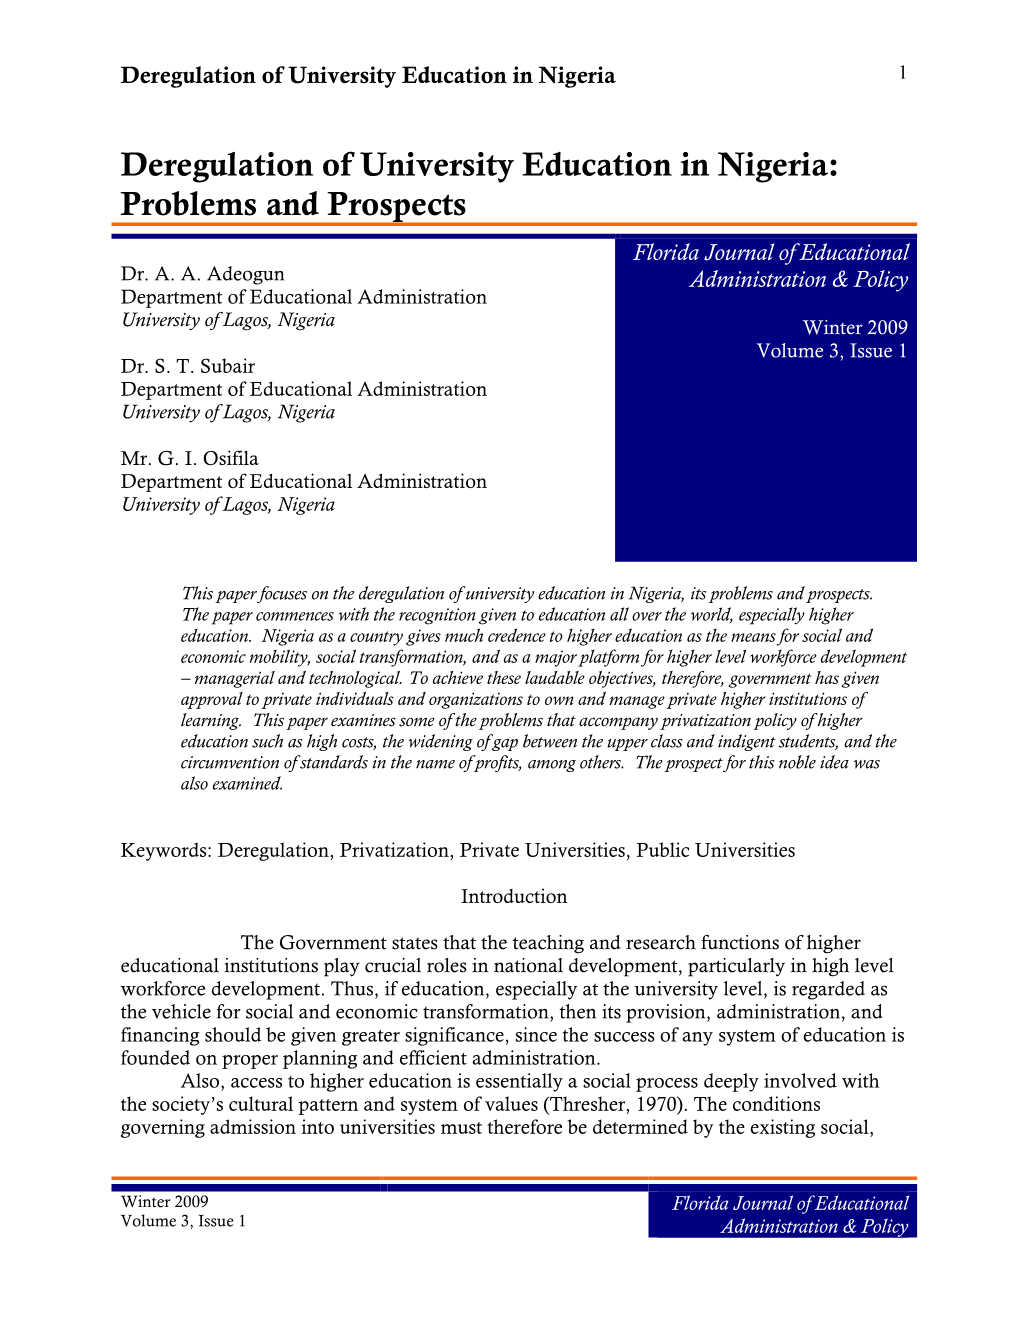 Deregulation of University Education in Nigeria: Problems and Prospects